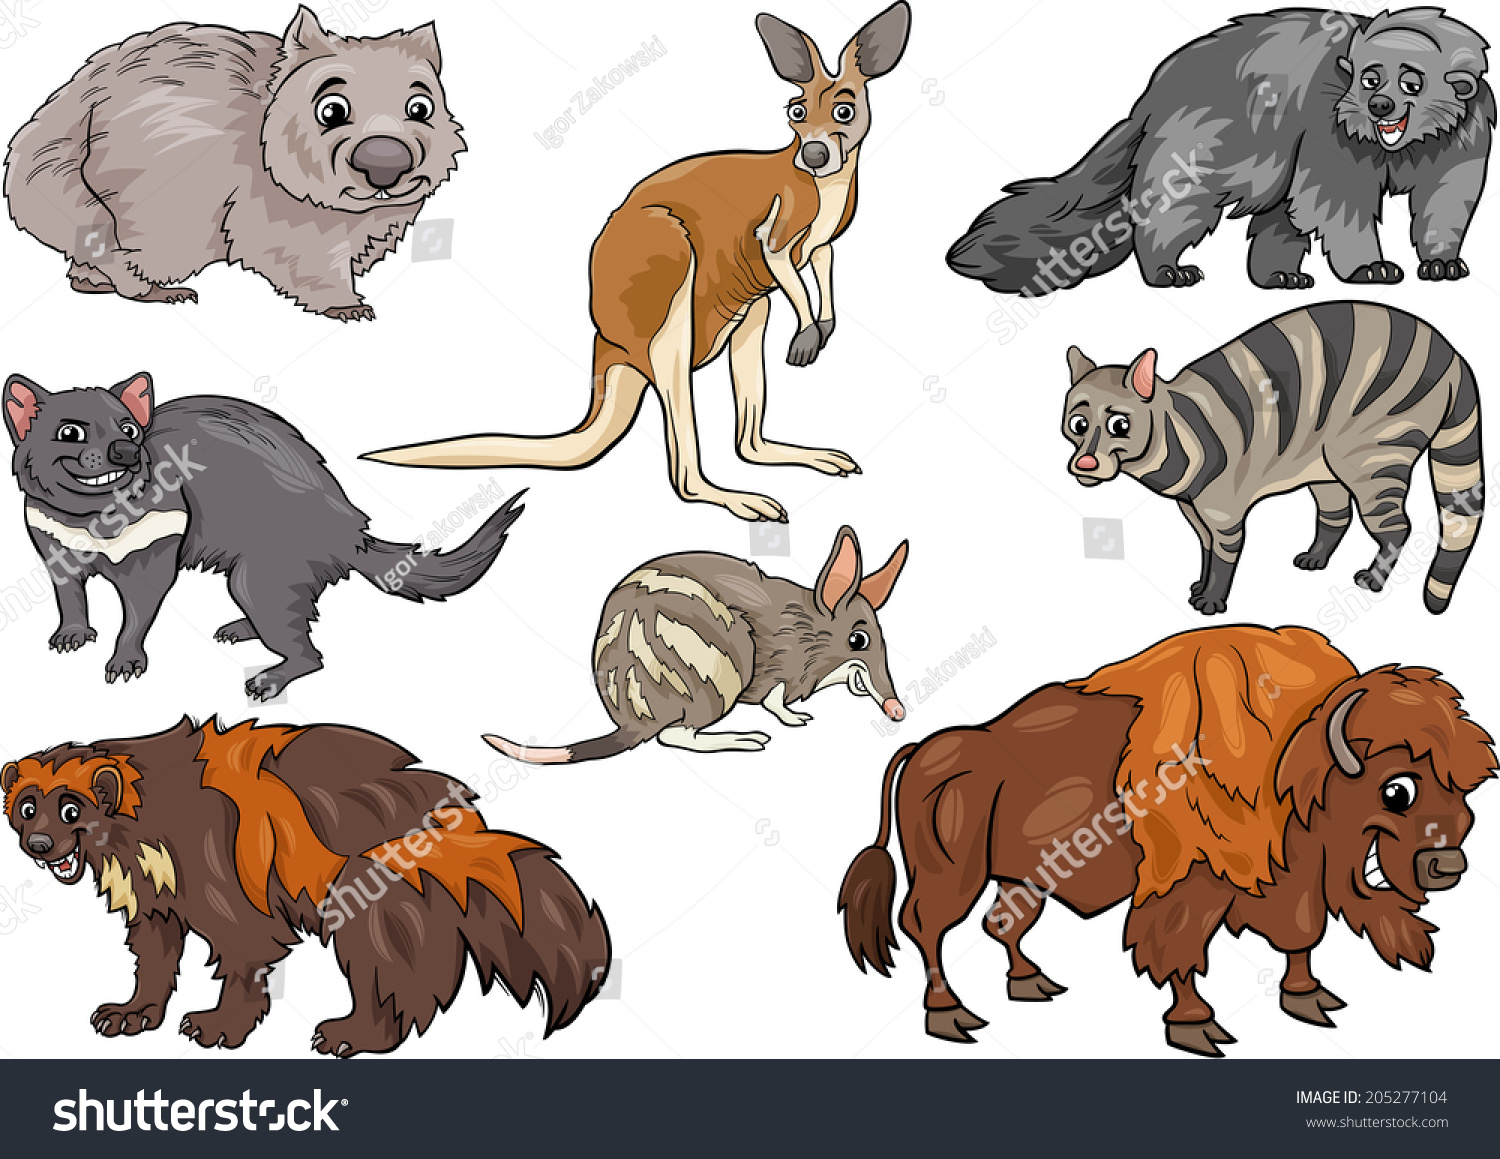 SVG of Cartoon Vector Illustration of Funny Wild Animals Characters Set svg